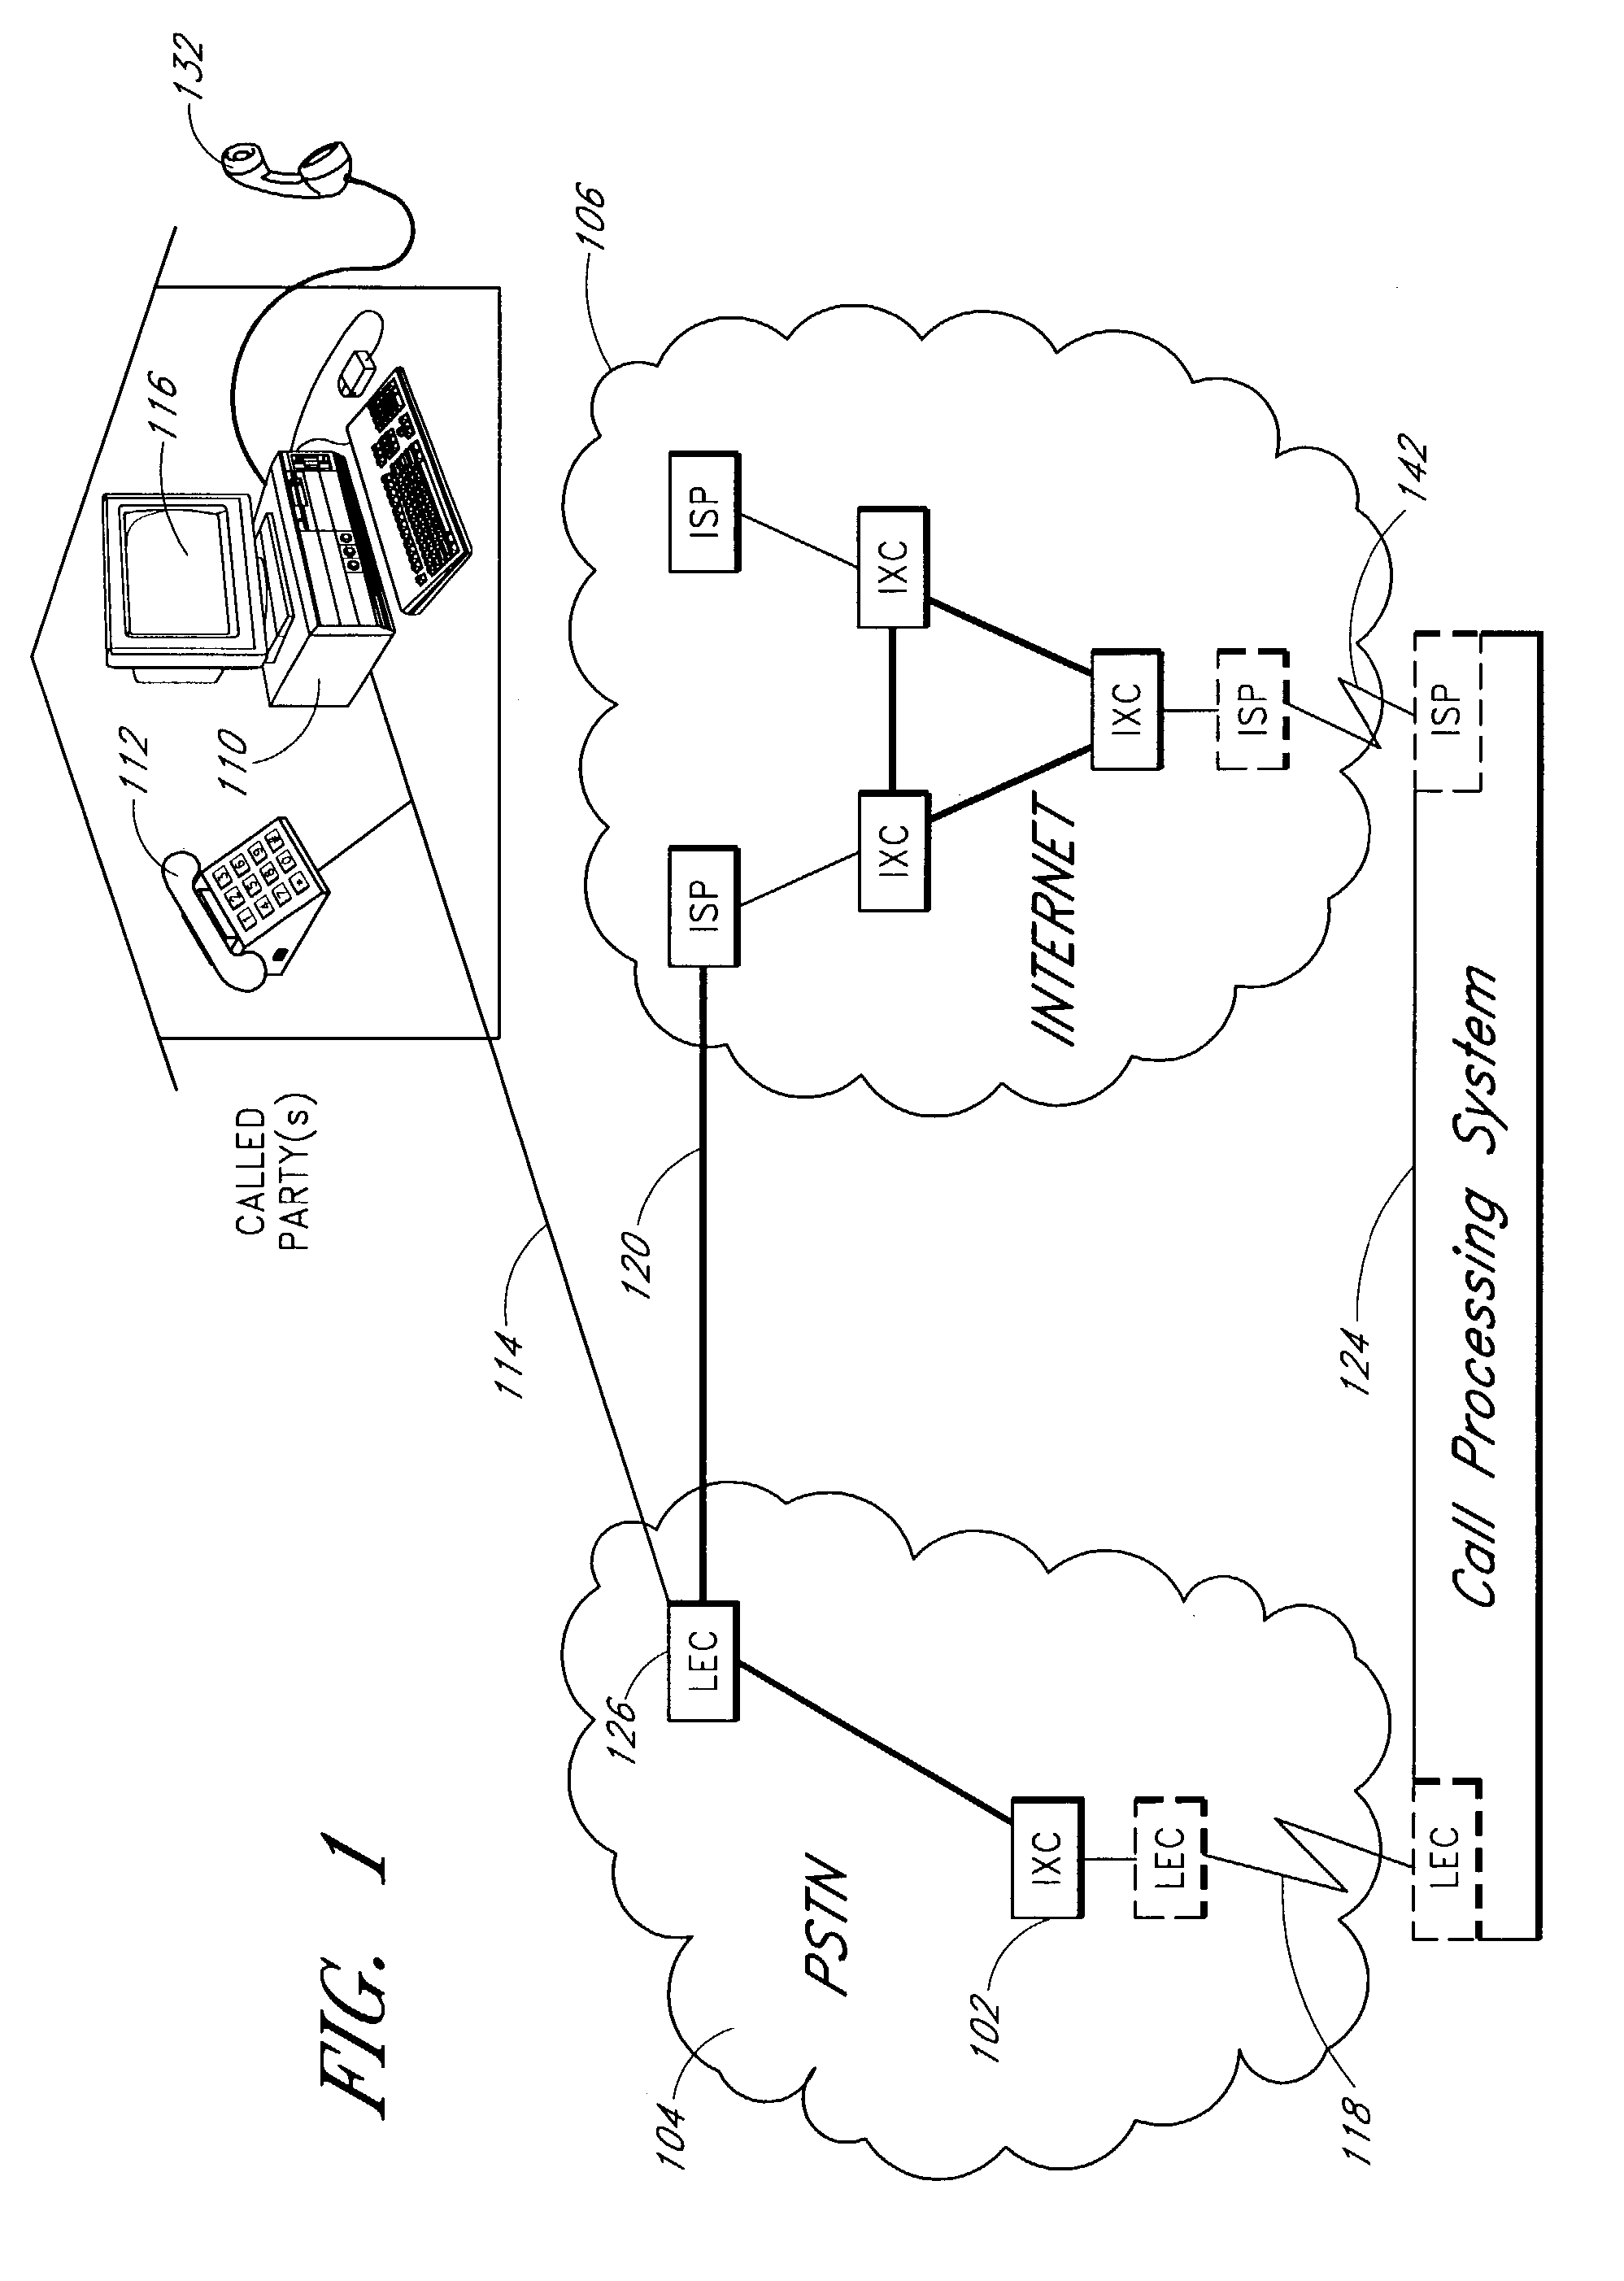 Apparatus and methods for telecommunication authentication